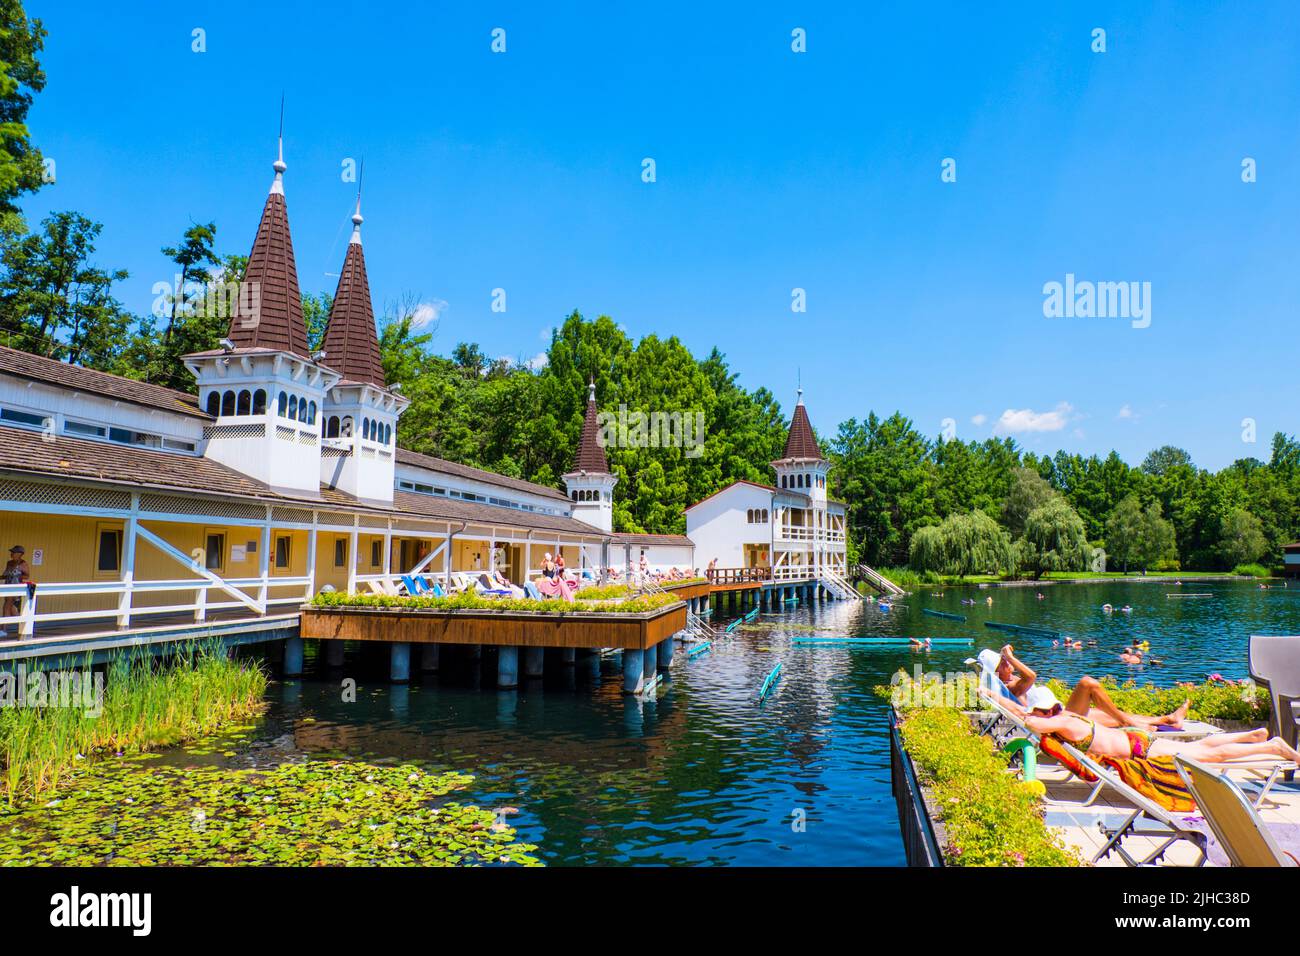 People by the wooden pavilions, at thermal lake, Heviz, Hungary Stock Photo